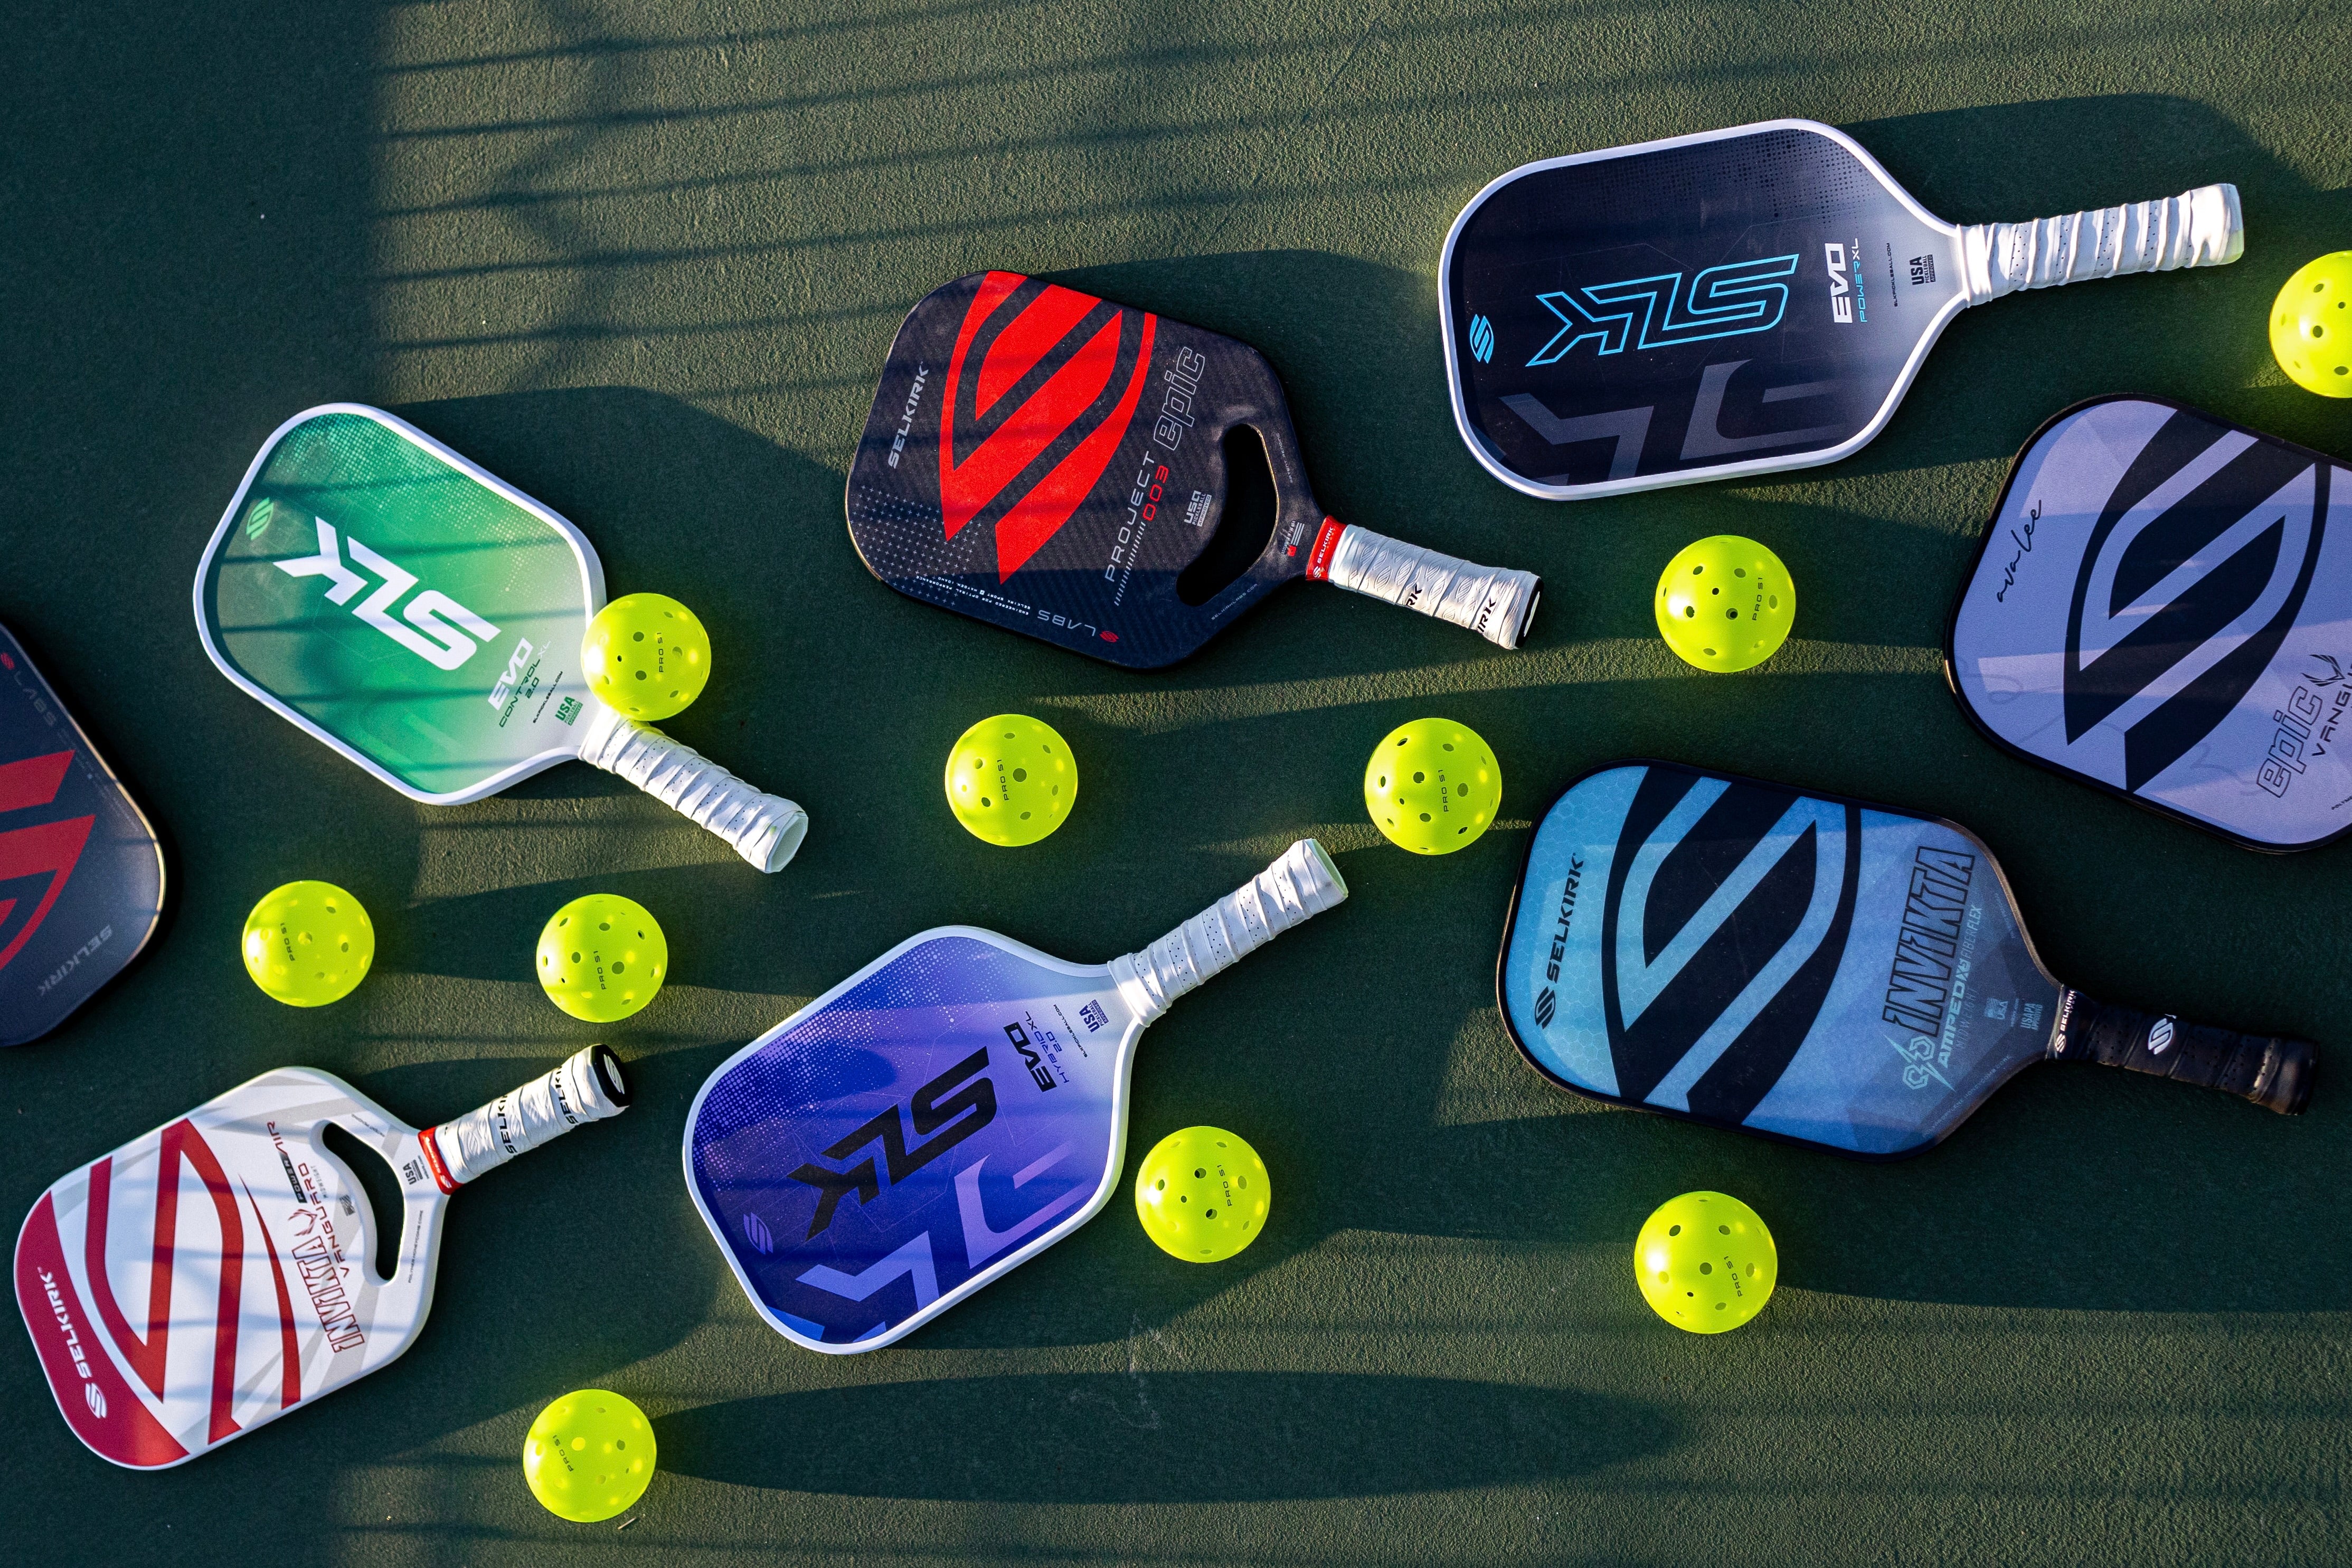 An array of Selkirk Sport pickleball paddles lay face up on a pickleball court. Scattered around them are several pickleballs.